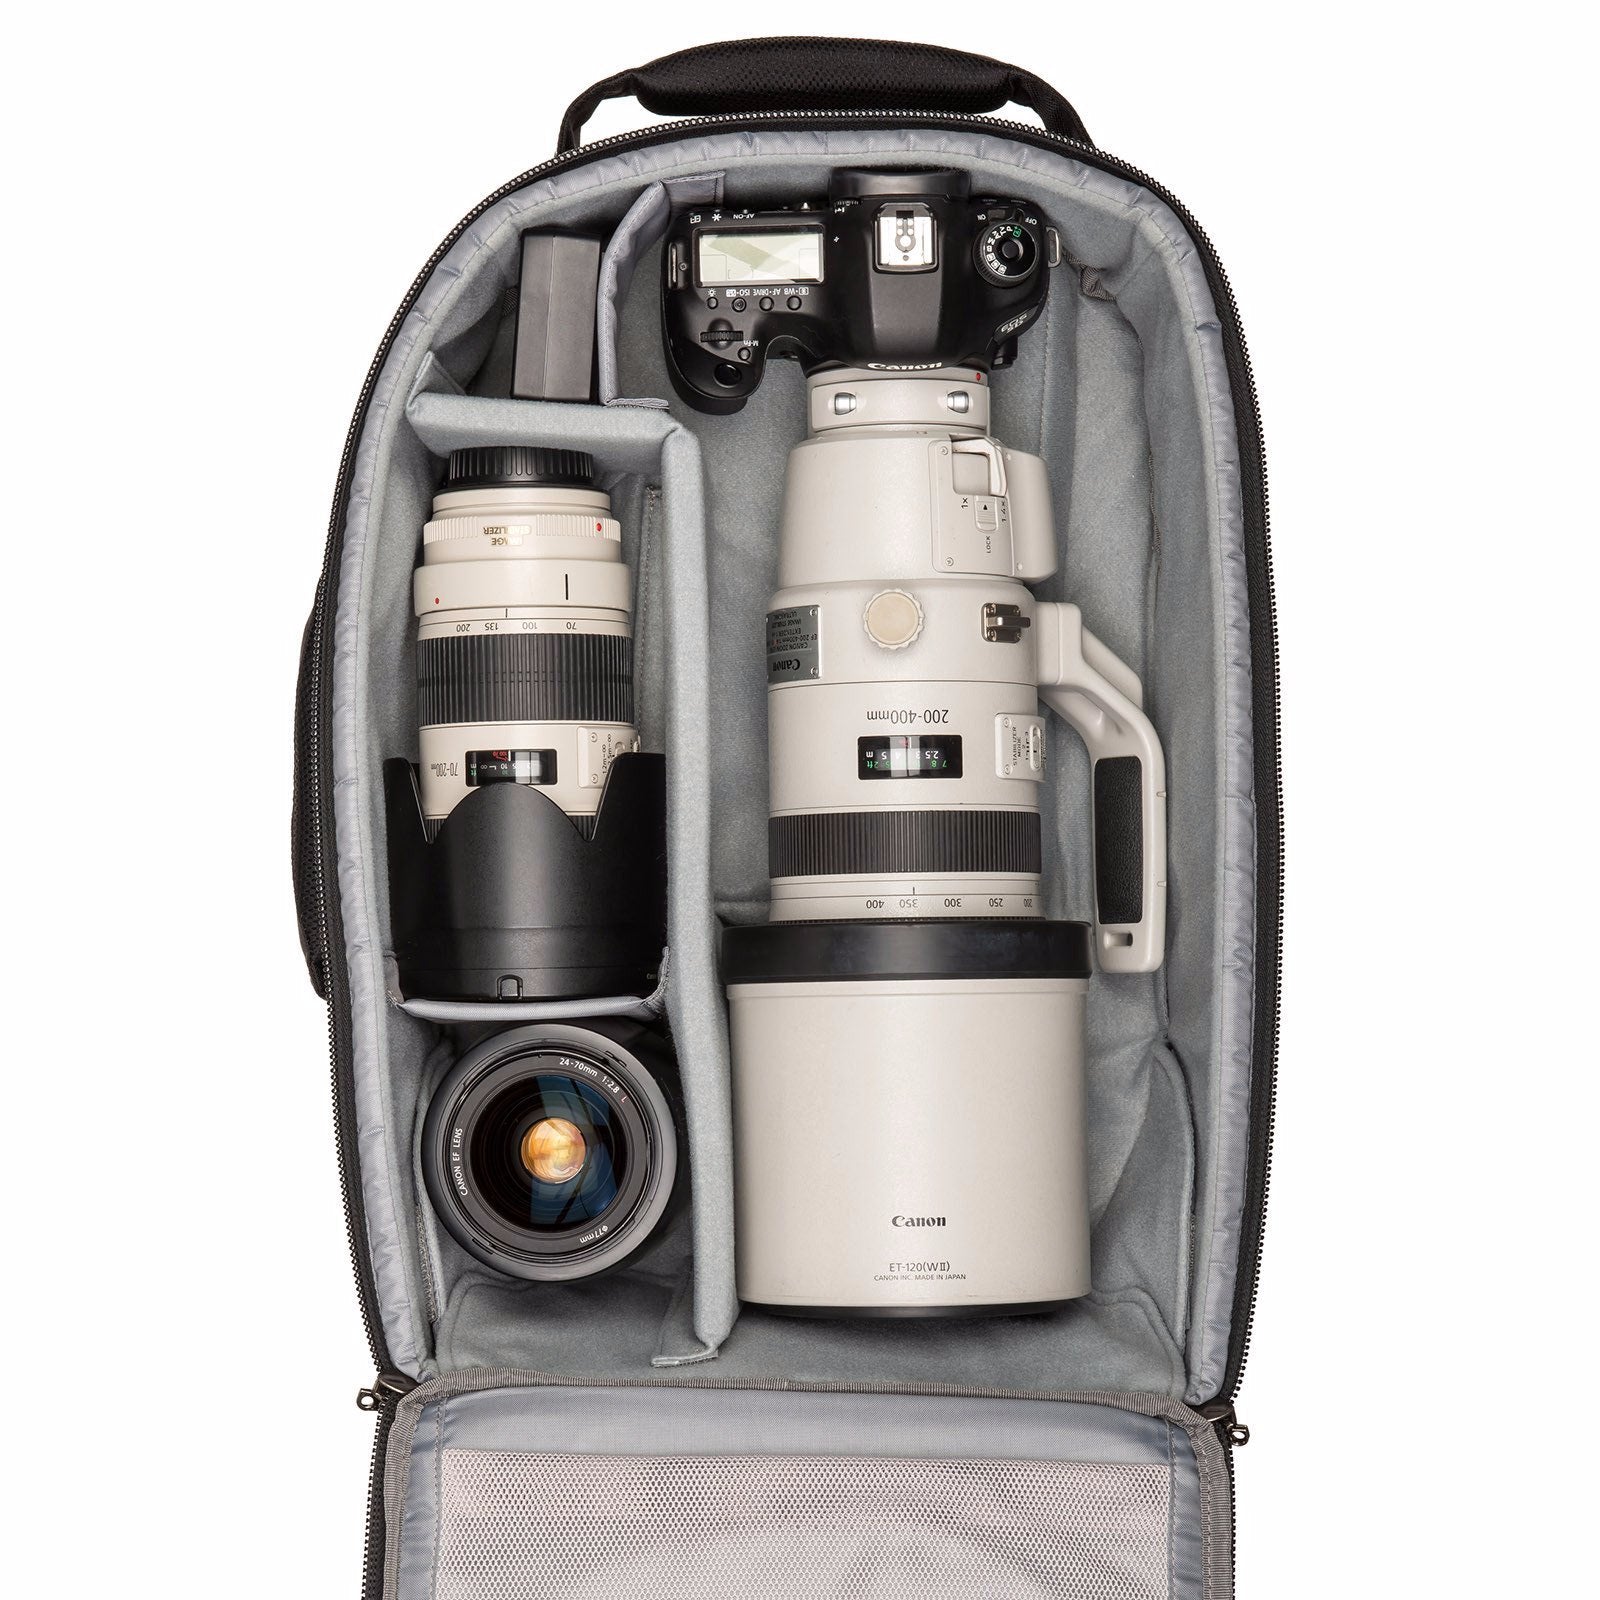 Canon standard size DSLR with 200-400mm f/4 attached, 70-200mm f/2.8, 24-70mm f/2.8